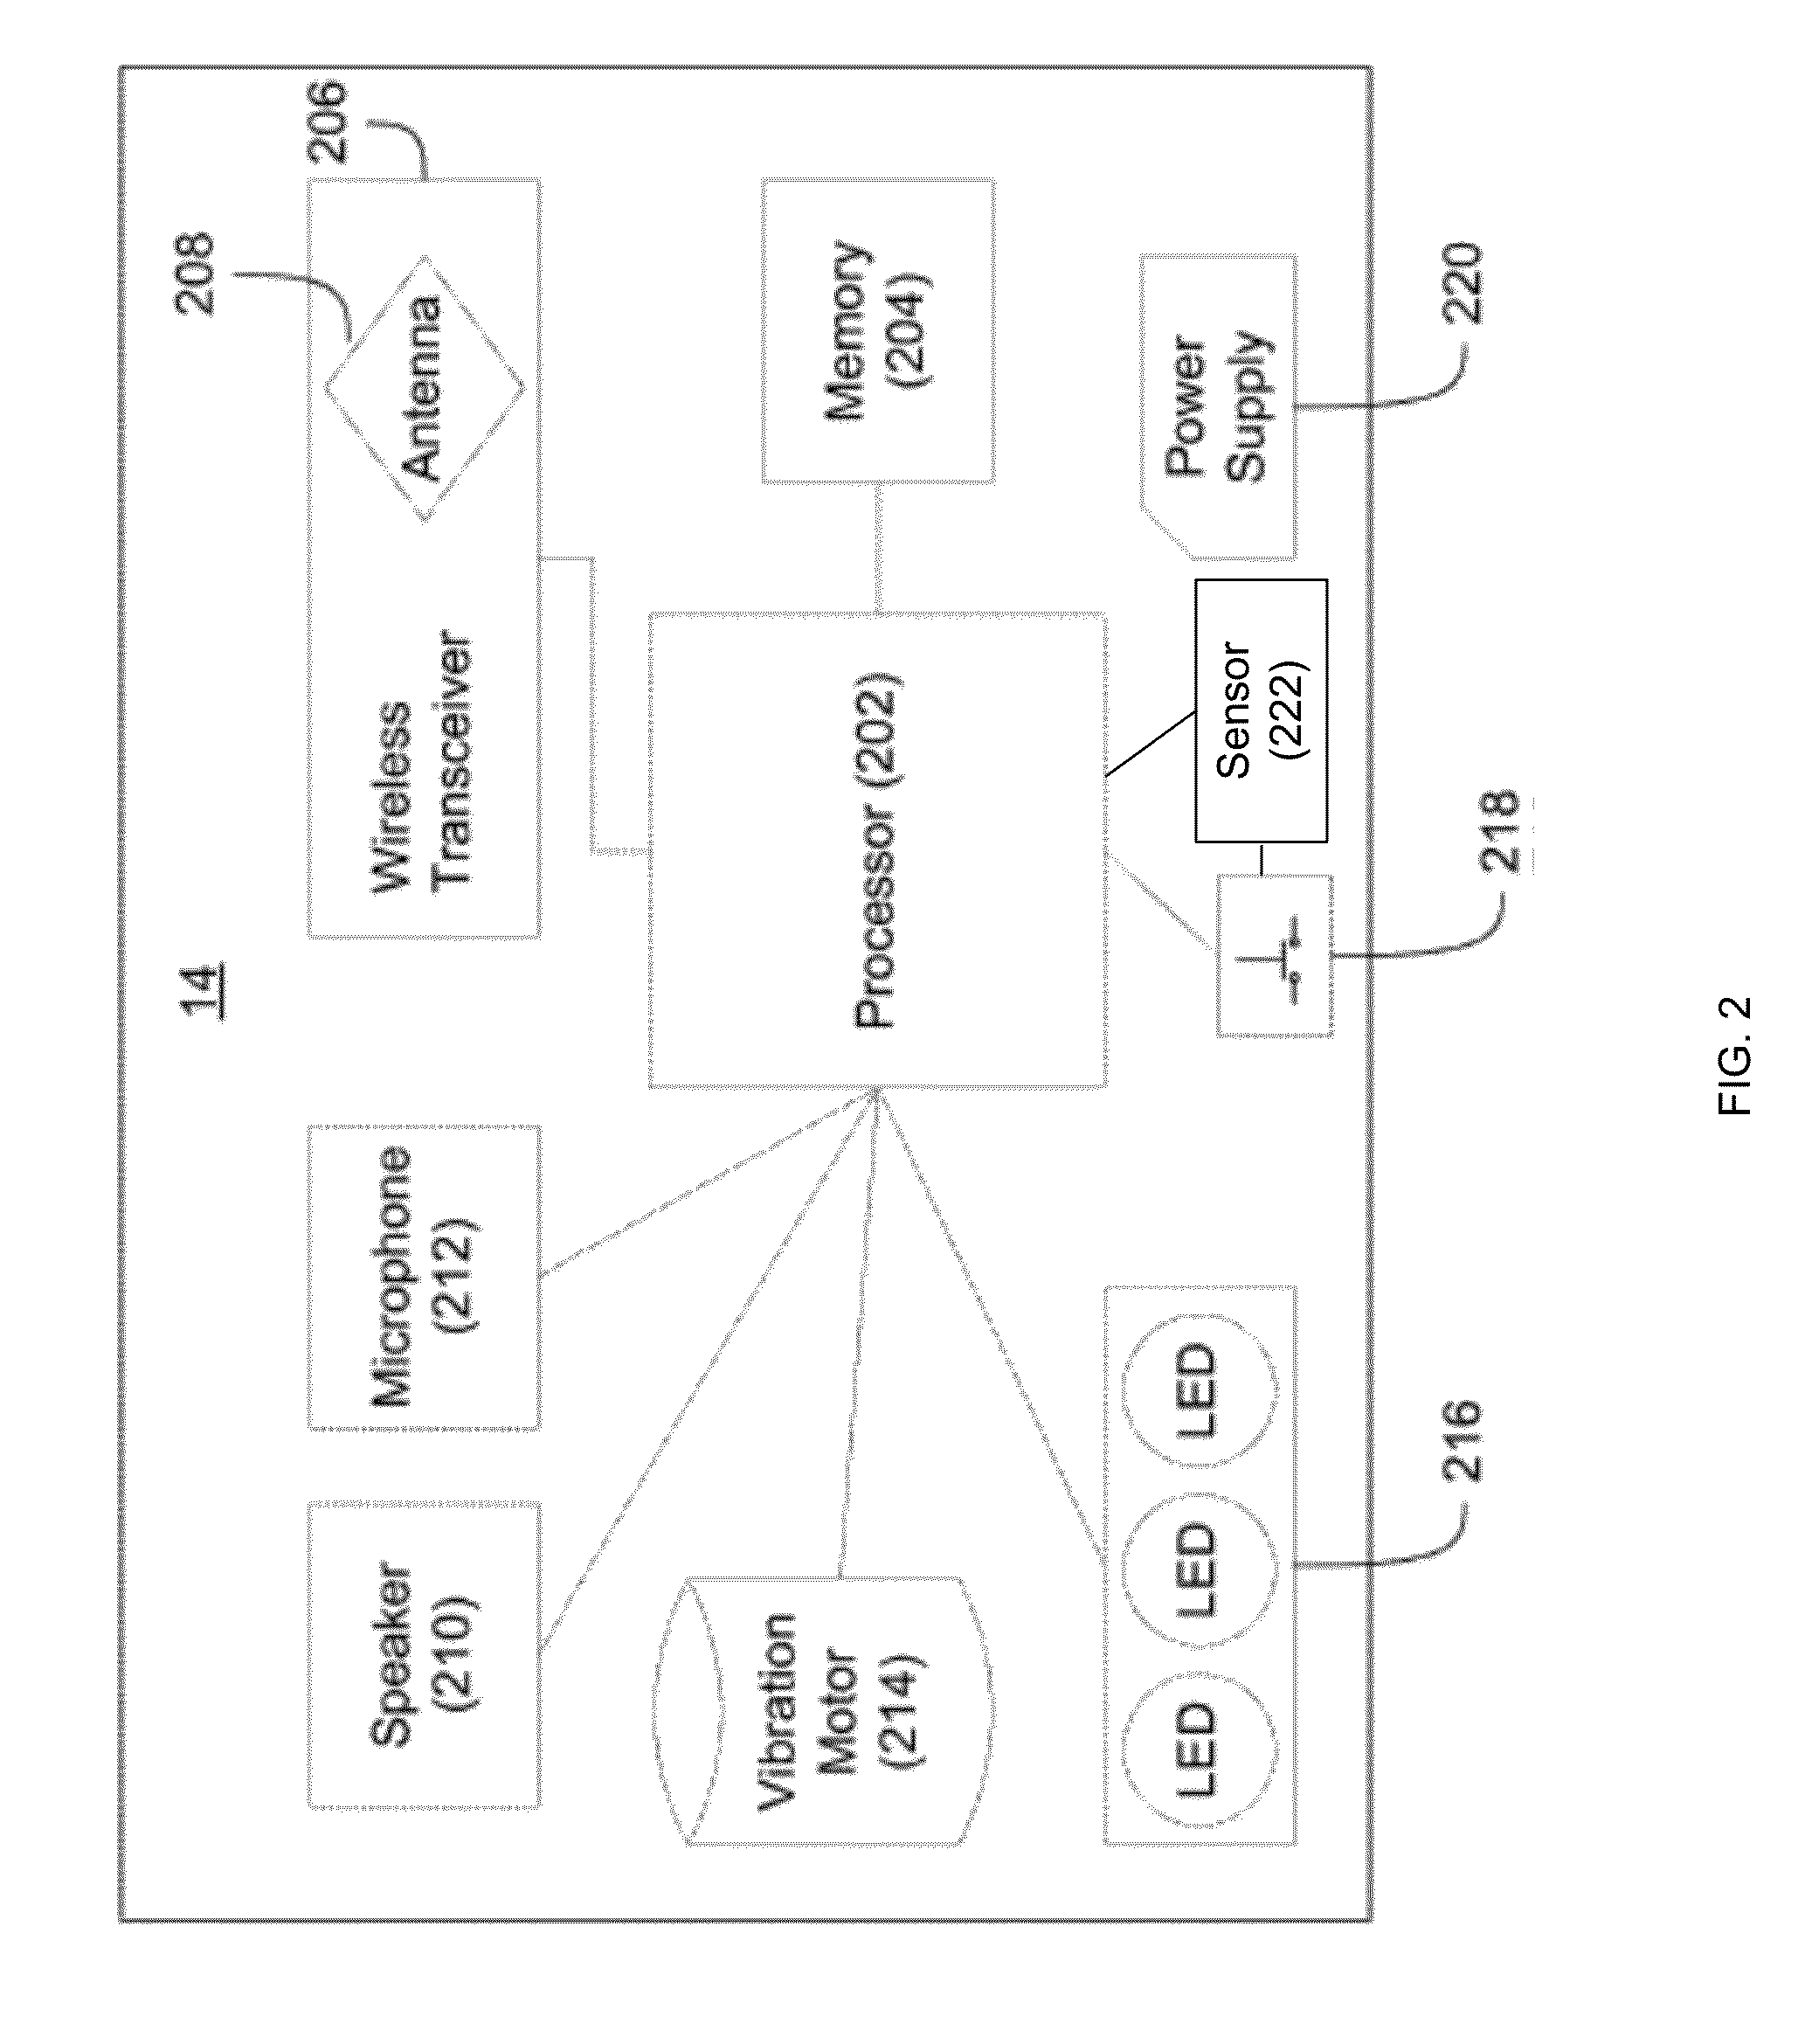 Wireless security device and method to place emergency calls